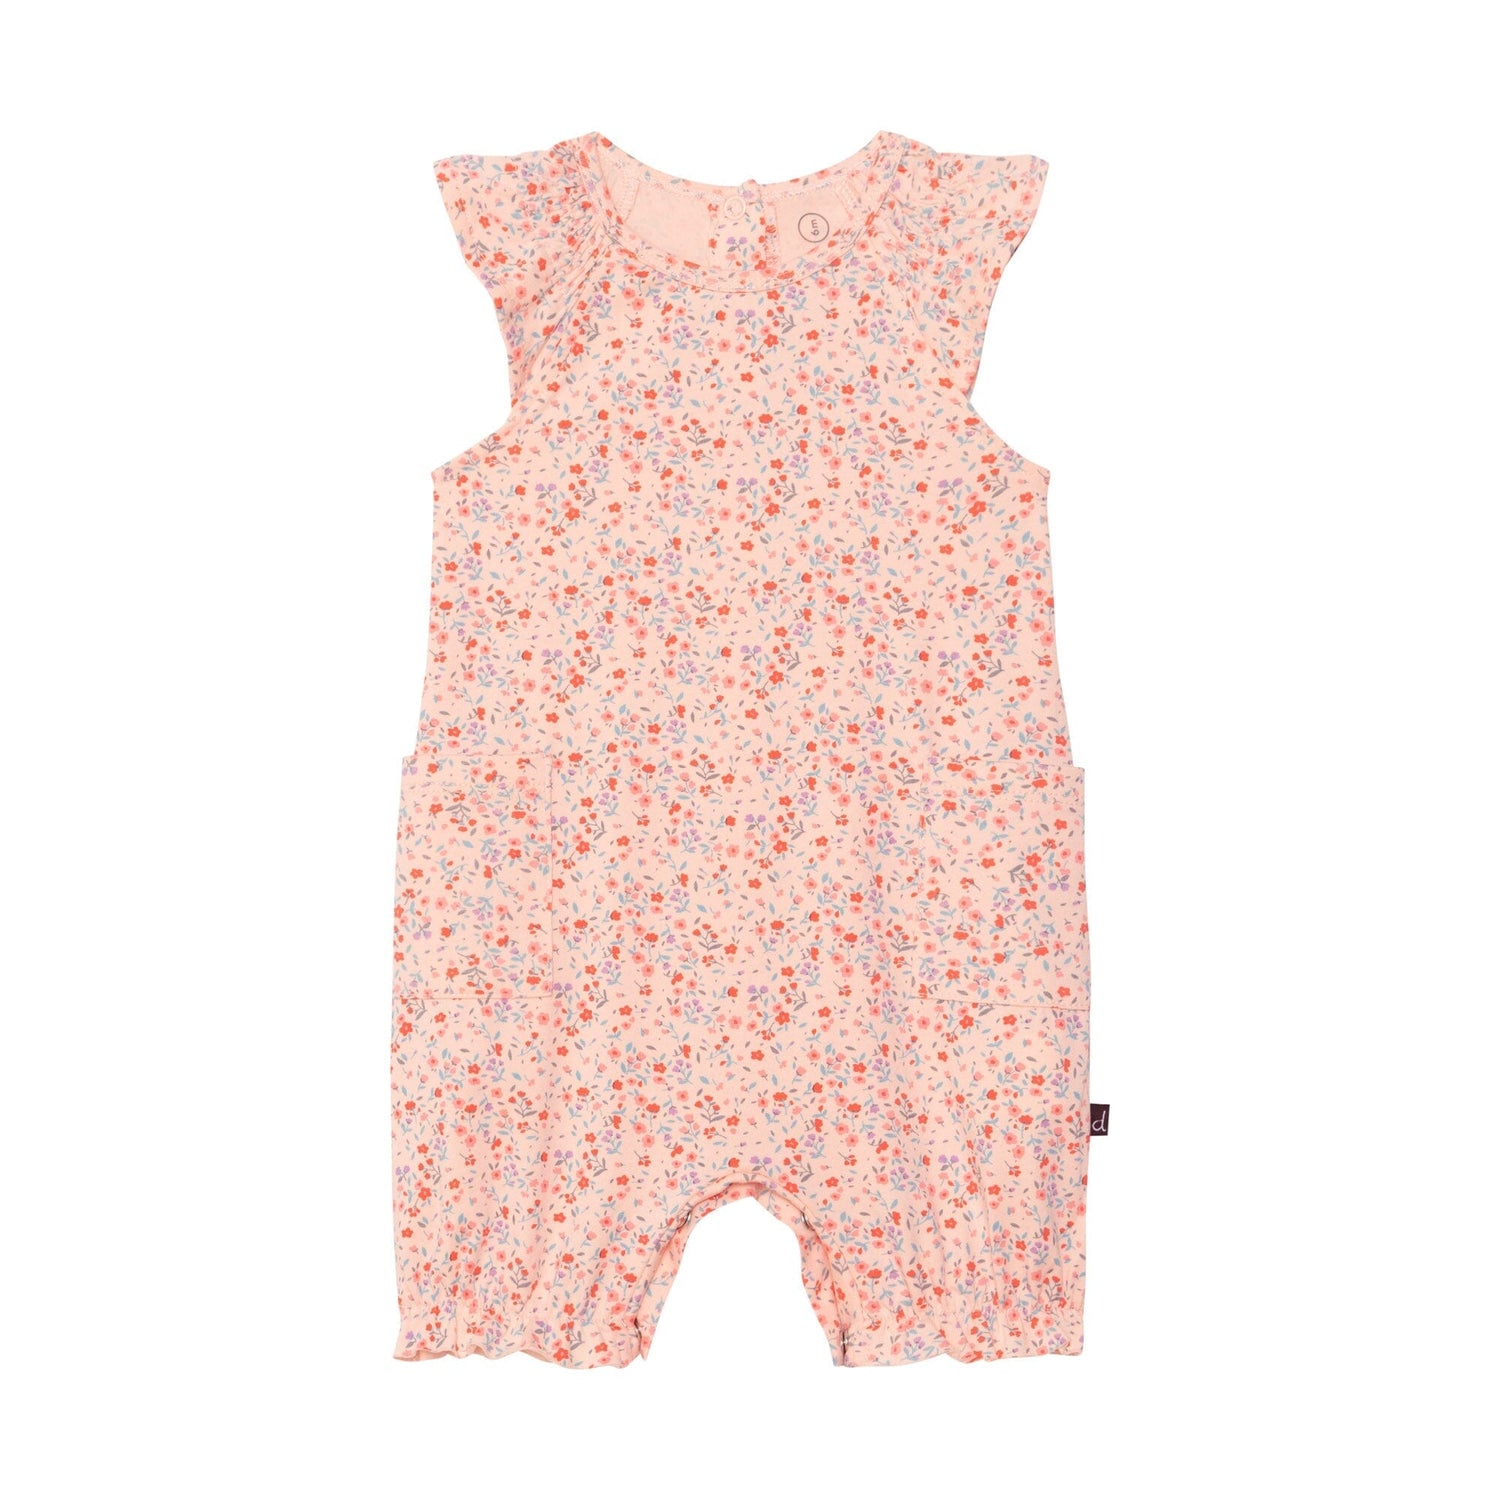 Organic Cotton Printed Romper Pink Little Flowers - E30A40_059